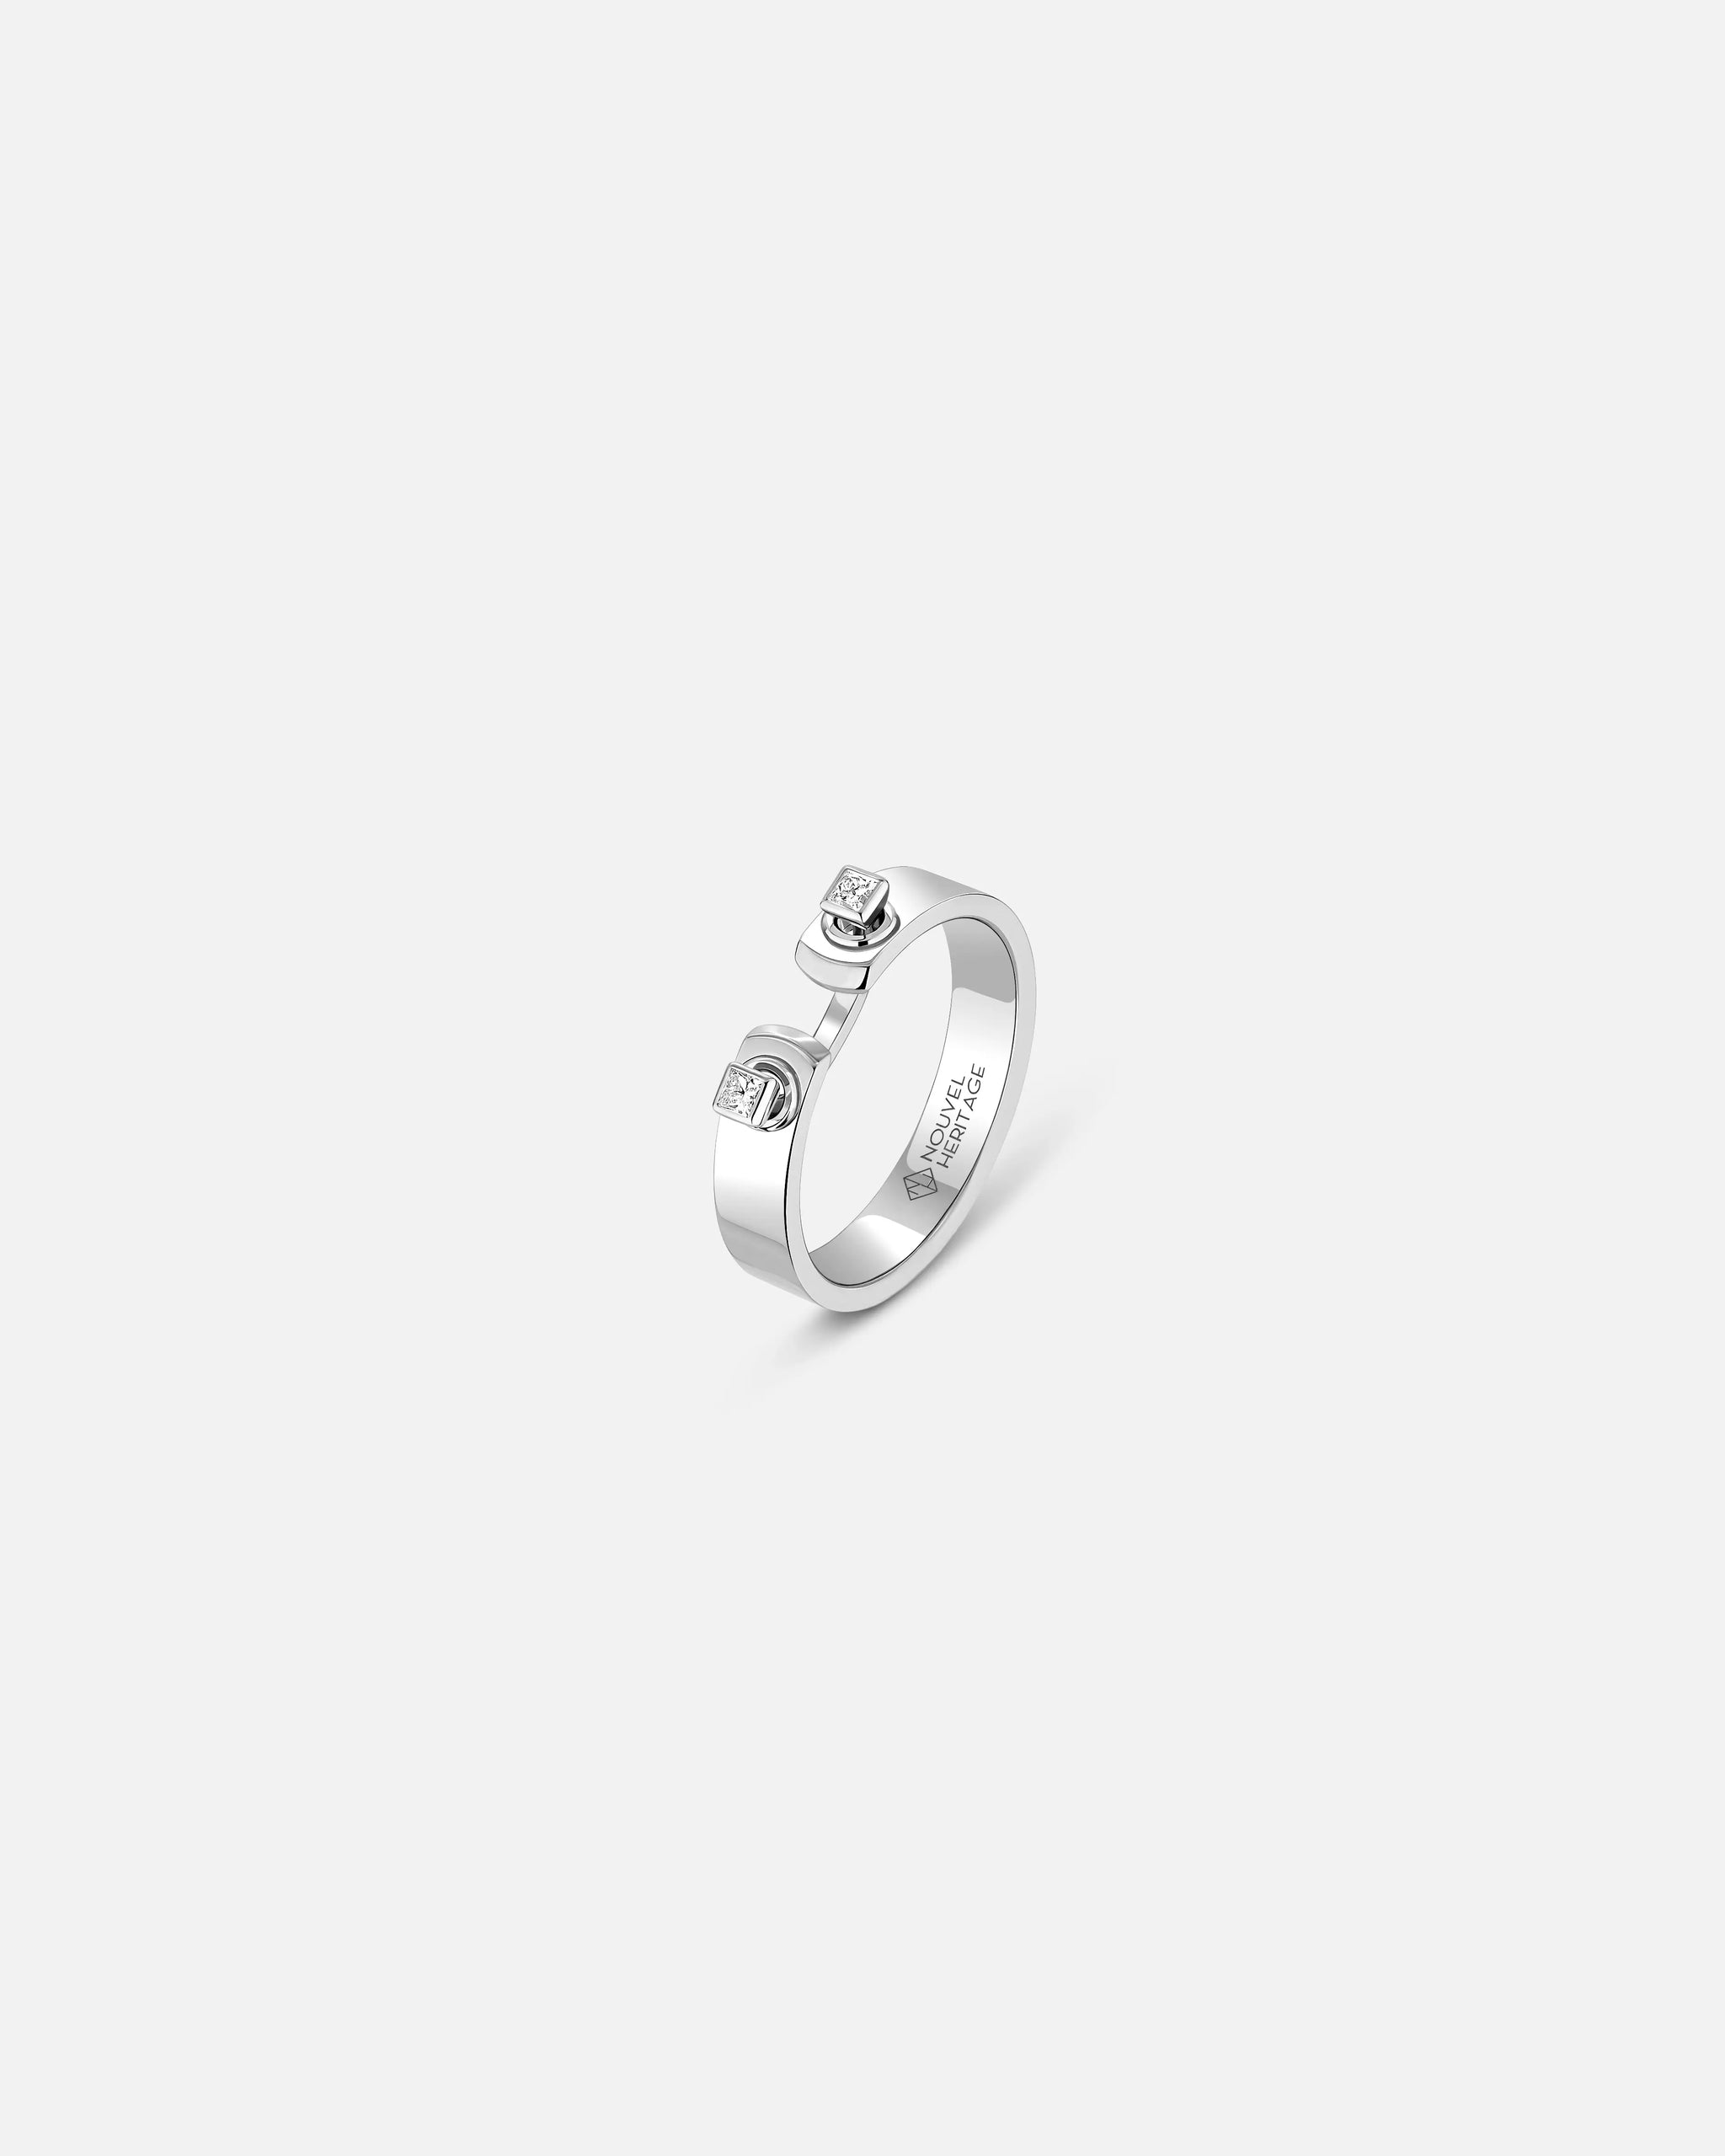 Dinner Date Mood Ring in White Gold - 1 - Nouvel Heritage